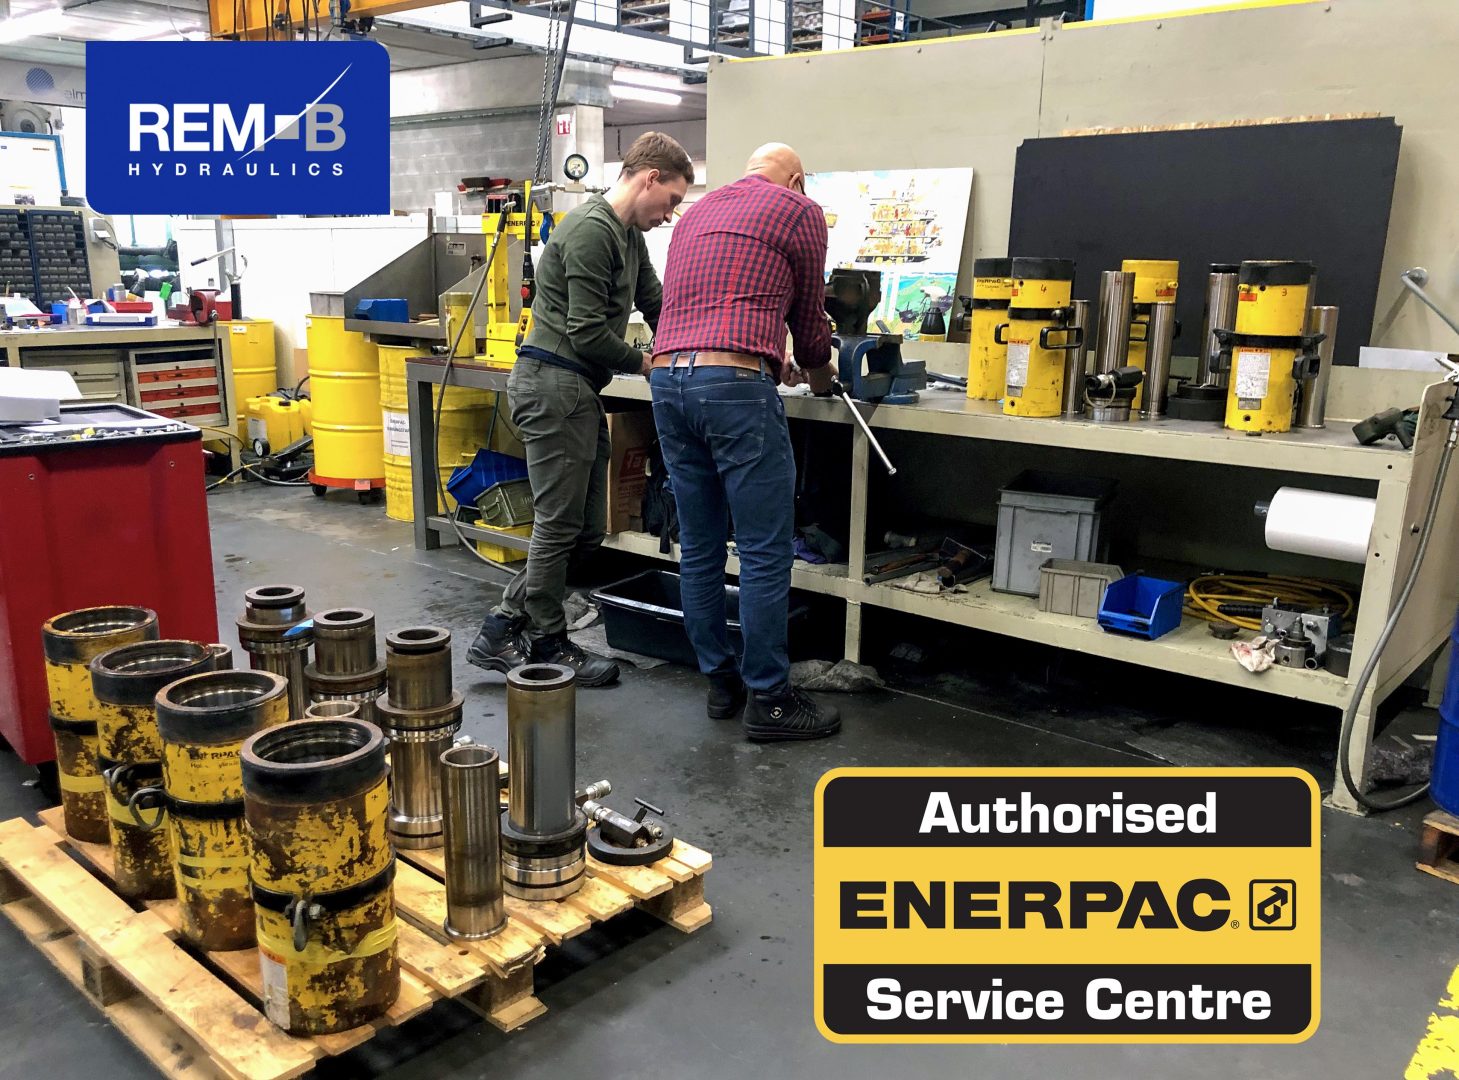 REM-B HYDRAULICS is an AUTHORIZED ENERPAC SERVICE CENTER